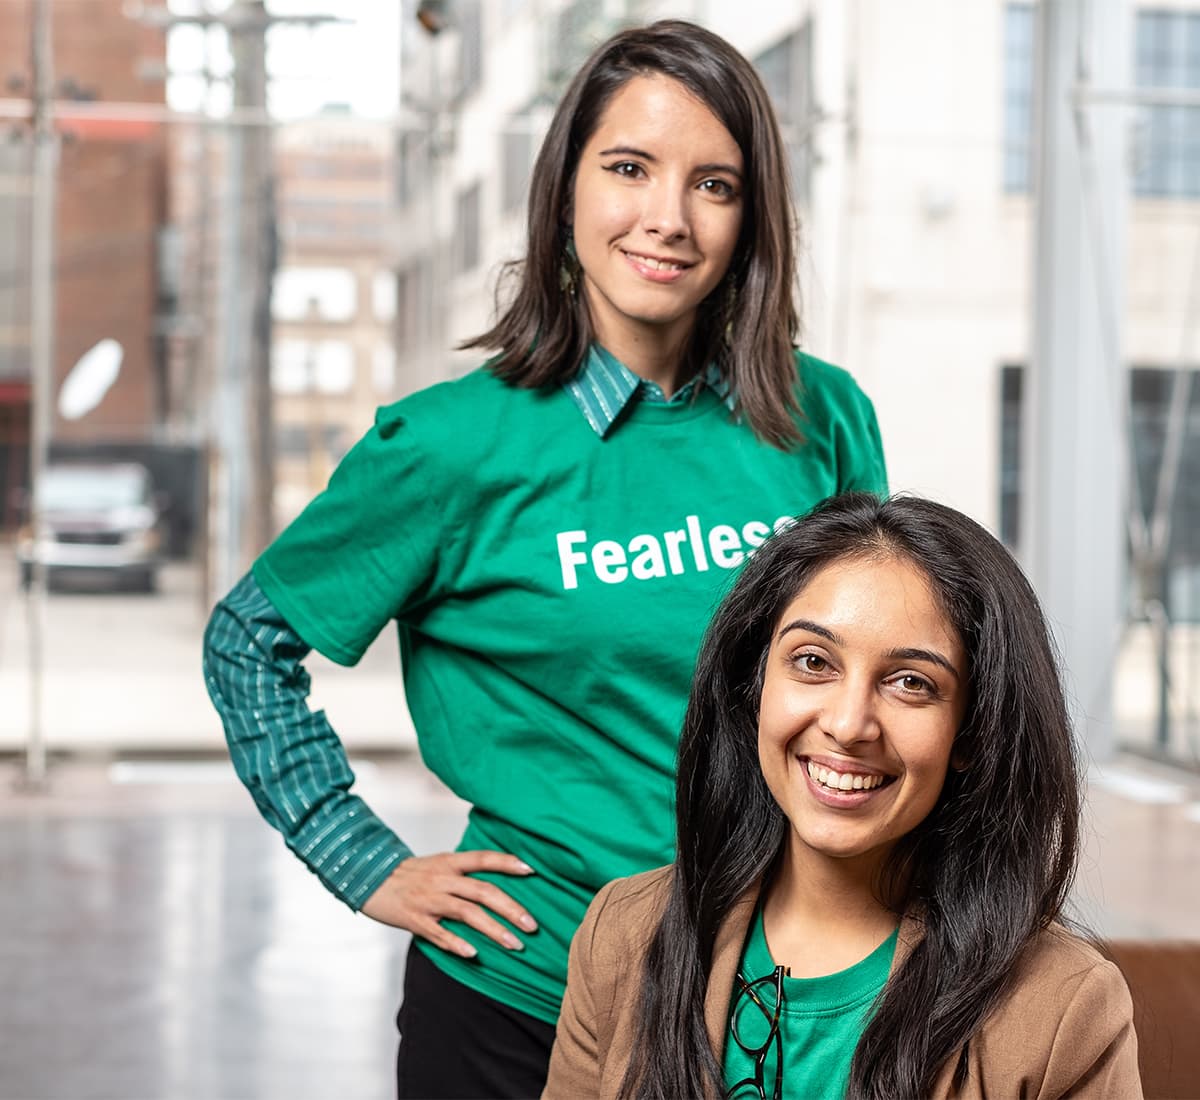 To women wearing green shirts that say fearless